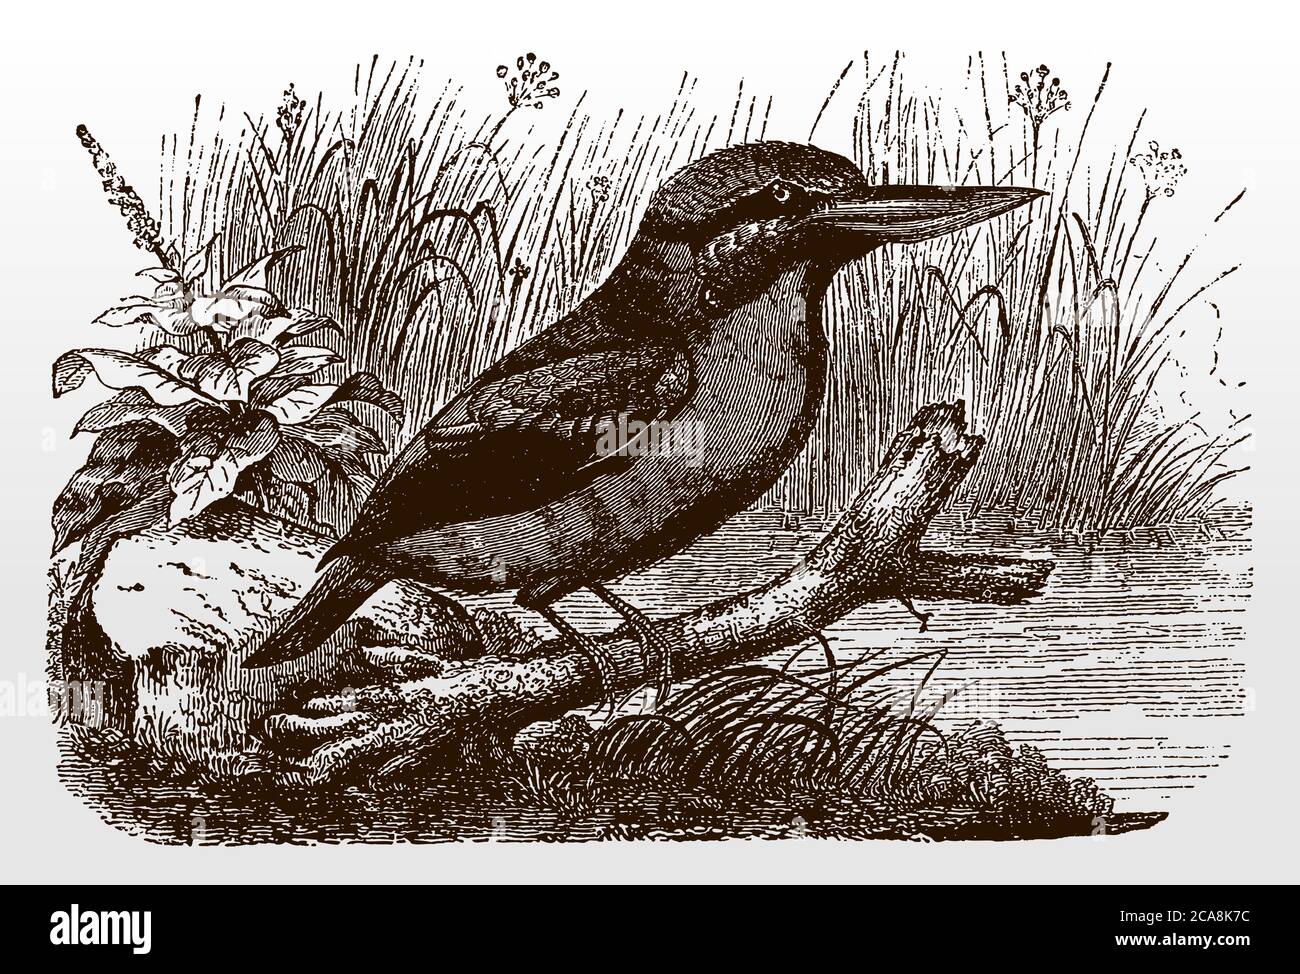 Laughing kookaburra, dacelo novaeguineae sitting on a branch near a water, after an antique illustration from the 19th century Stock Vector